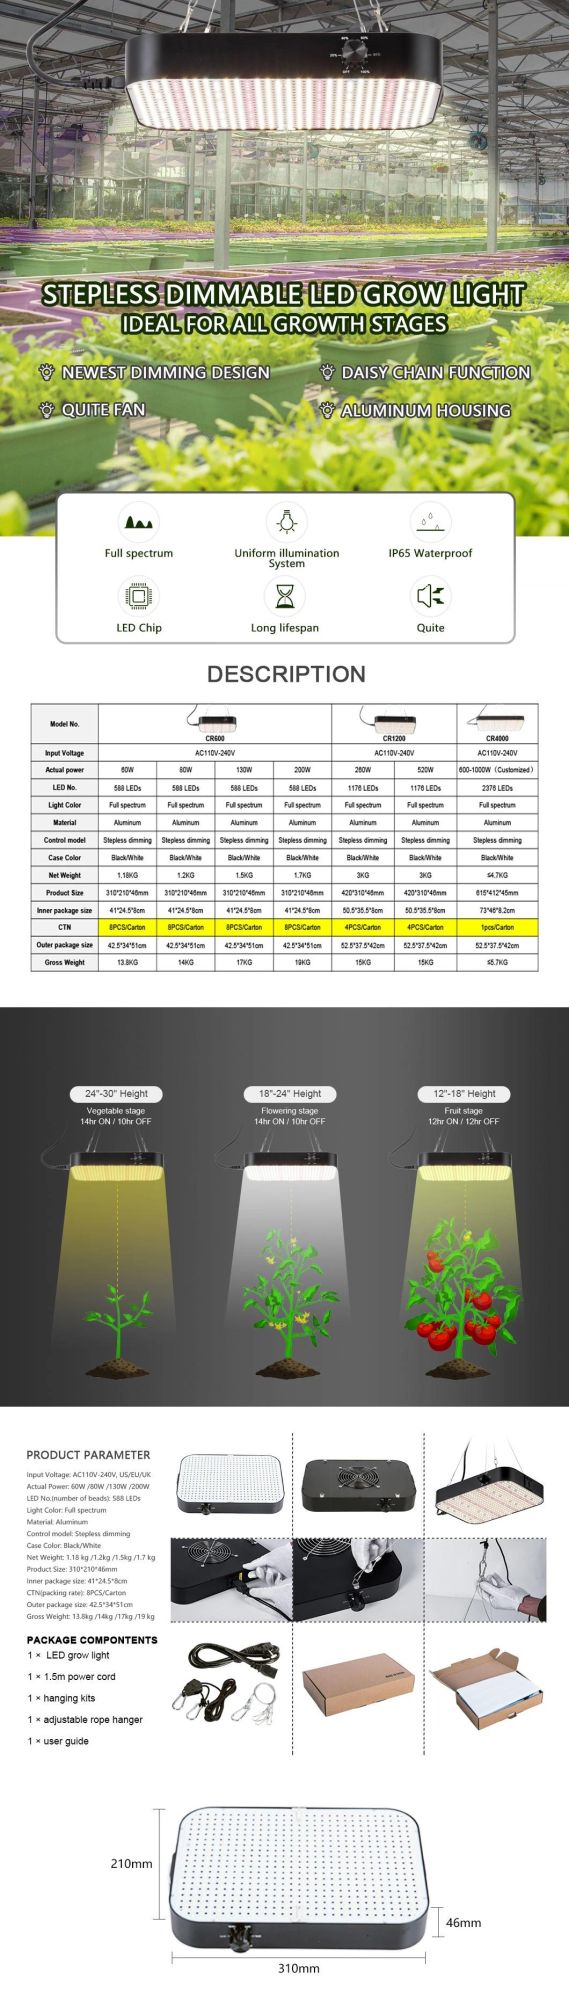 Indoor Waterproof 80W Full Spectrum Hanging Professional Samsung, Osram, Wholesale LED Panel Grow Lamp Quantum Board with Daisy Chain Function